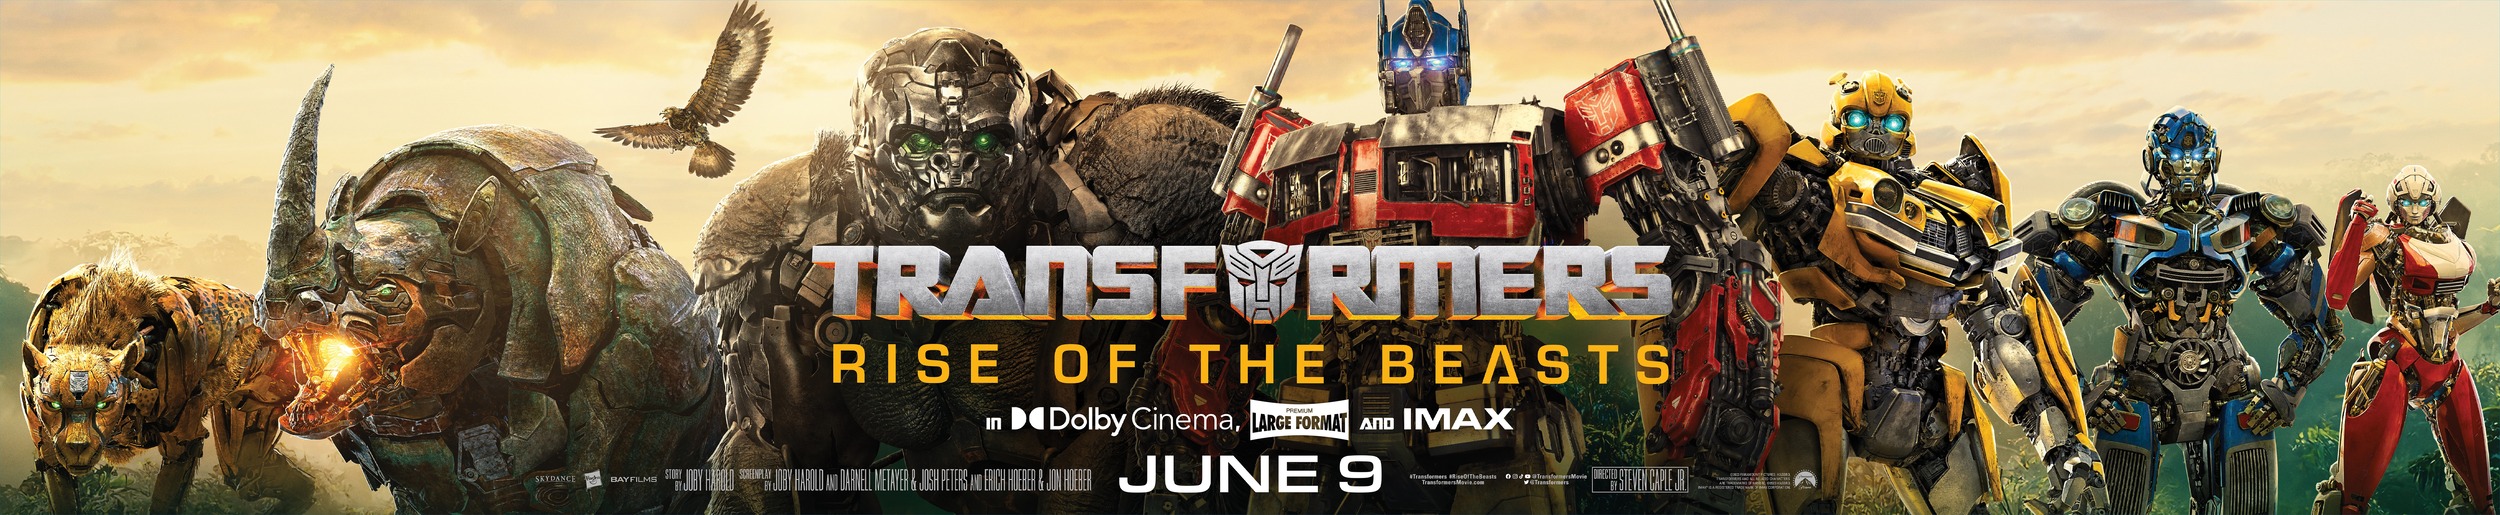 Mega Sized Movie Poster Image for Transformers: Rise of the Beasts (#34 of 37)